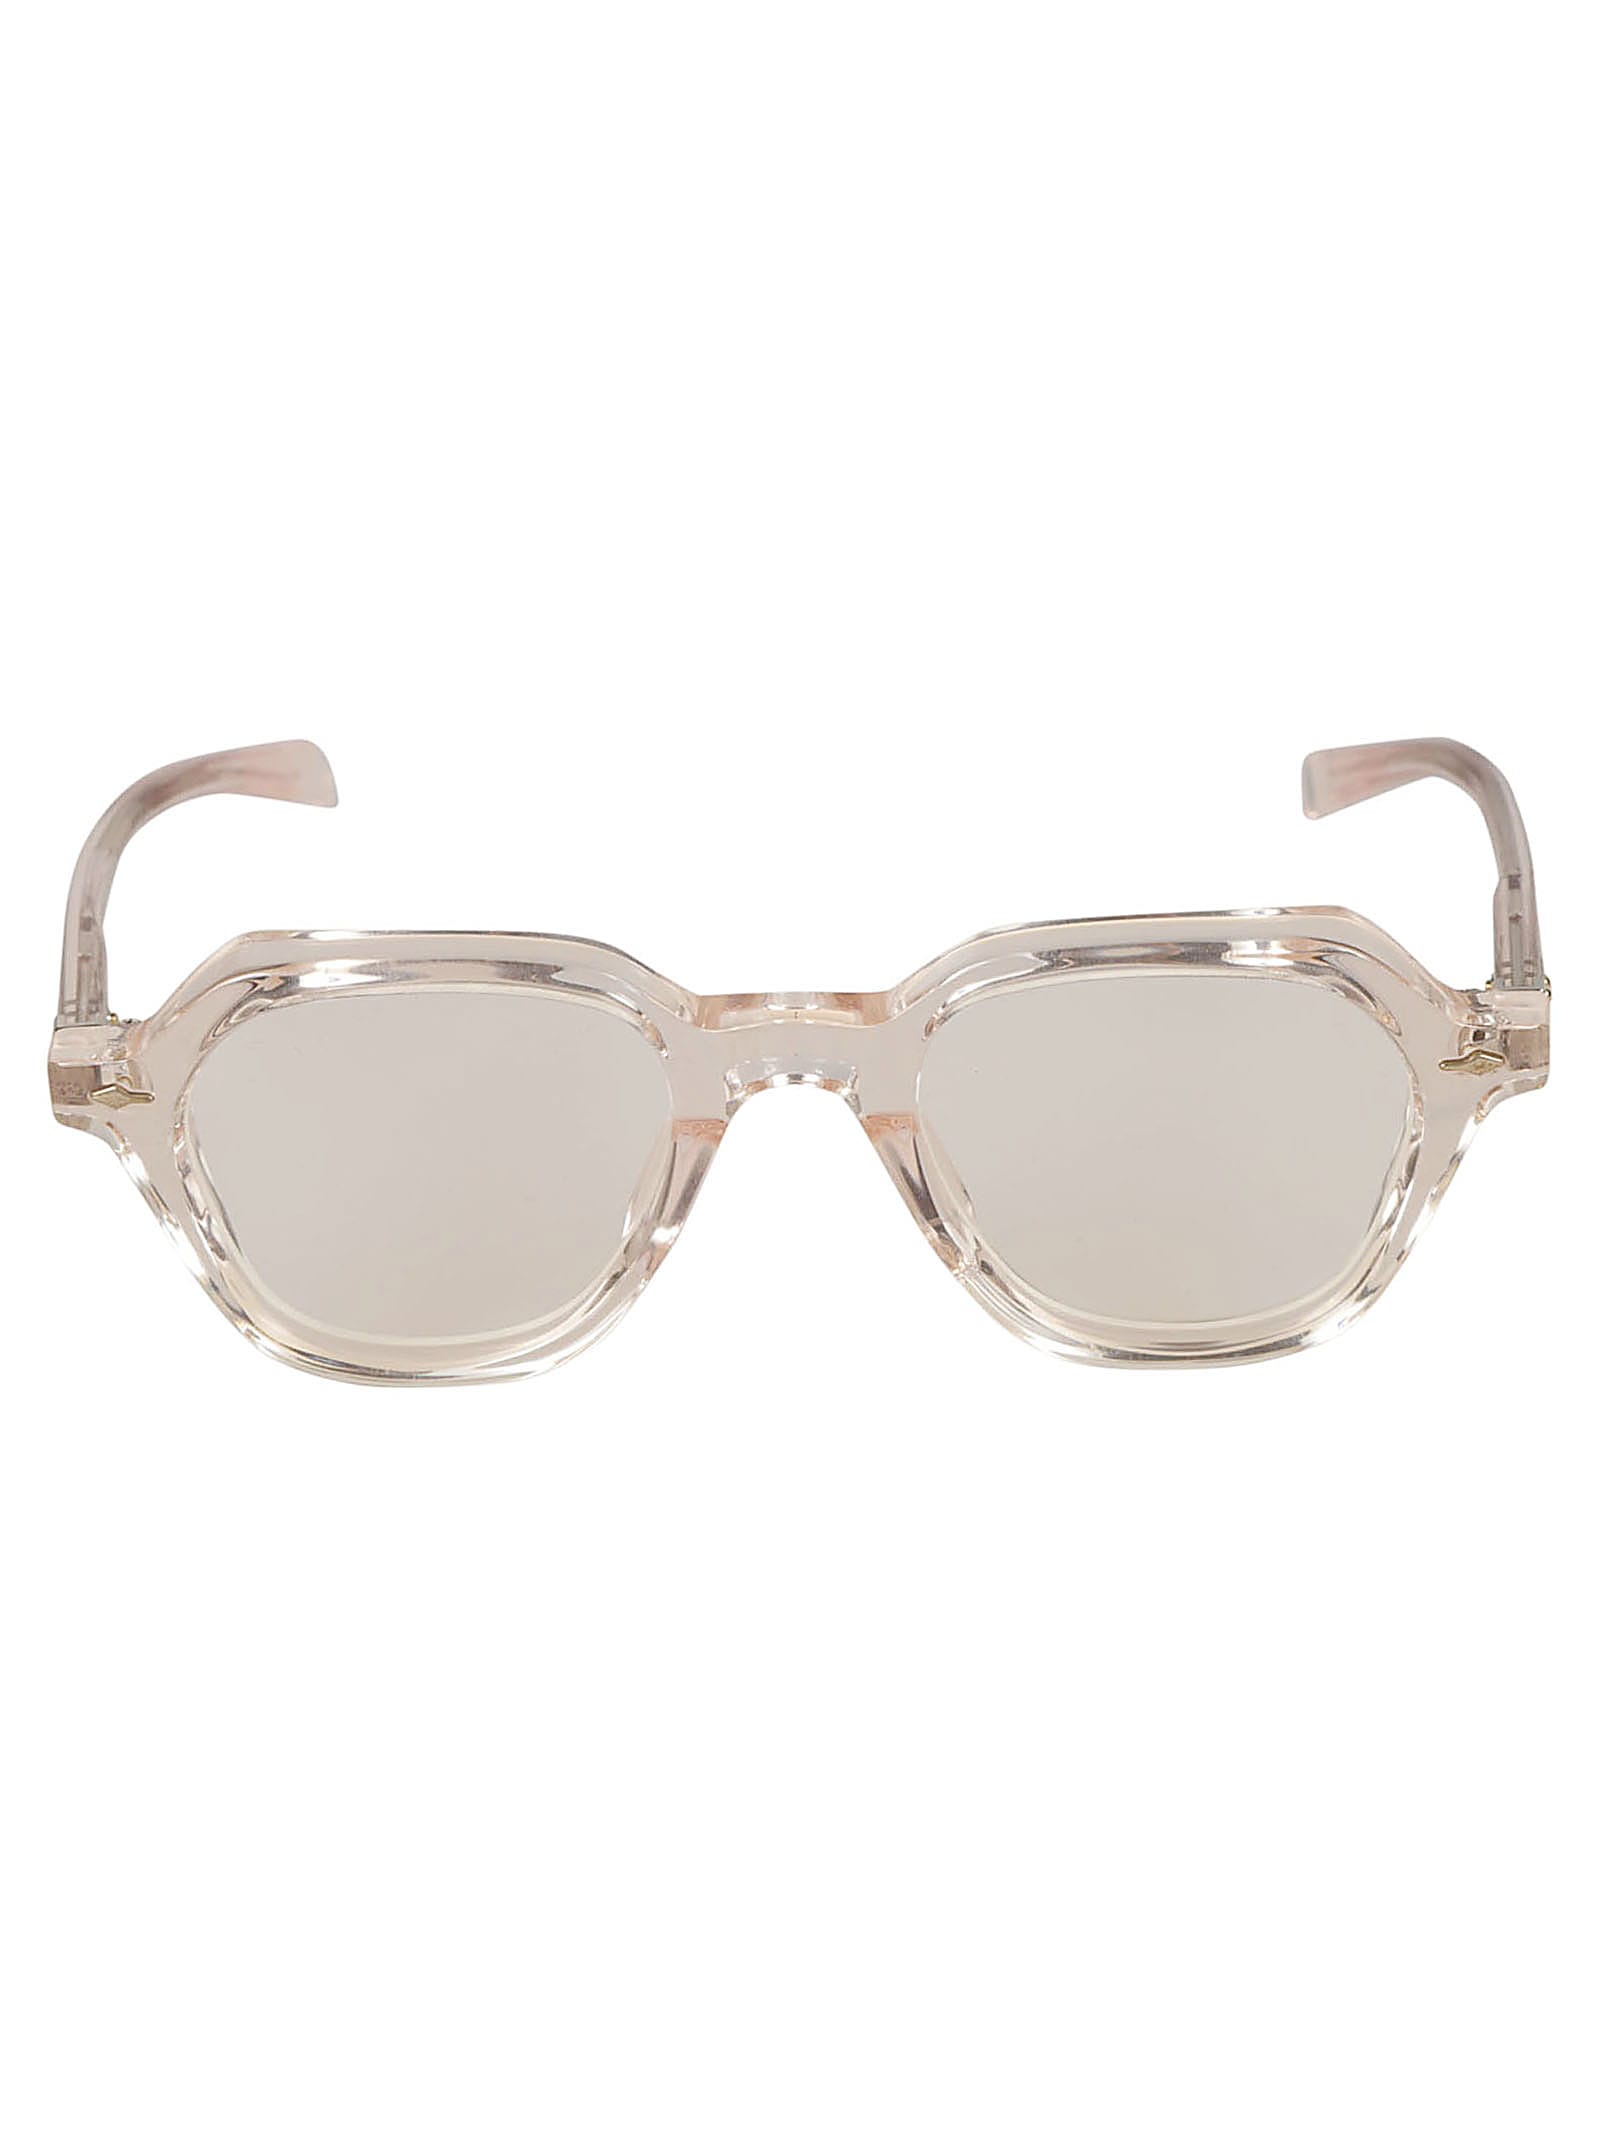 Jacques Marie Mage Insley Frame Glasses In Crystal